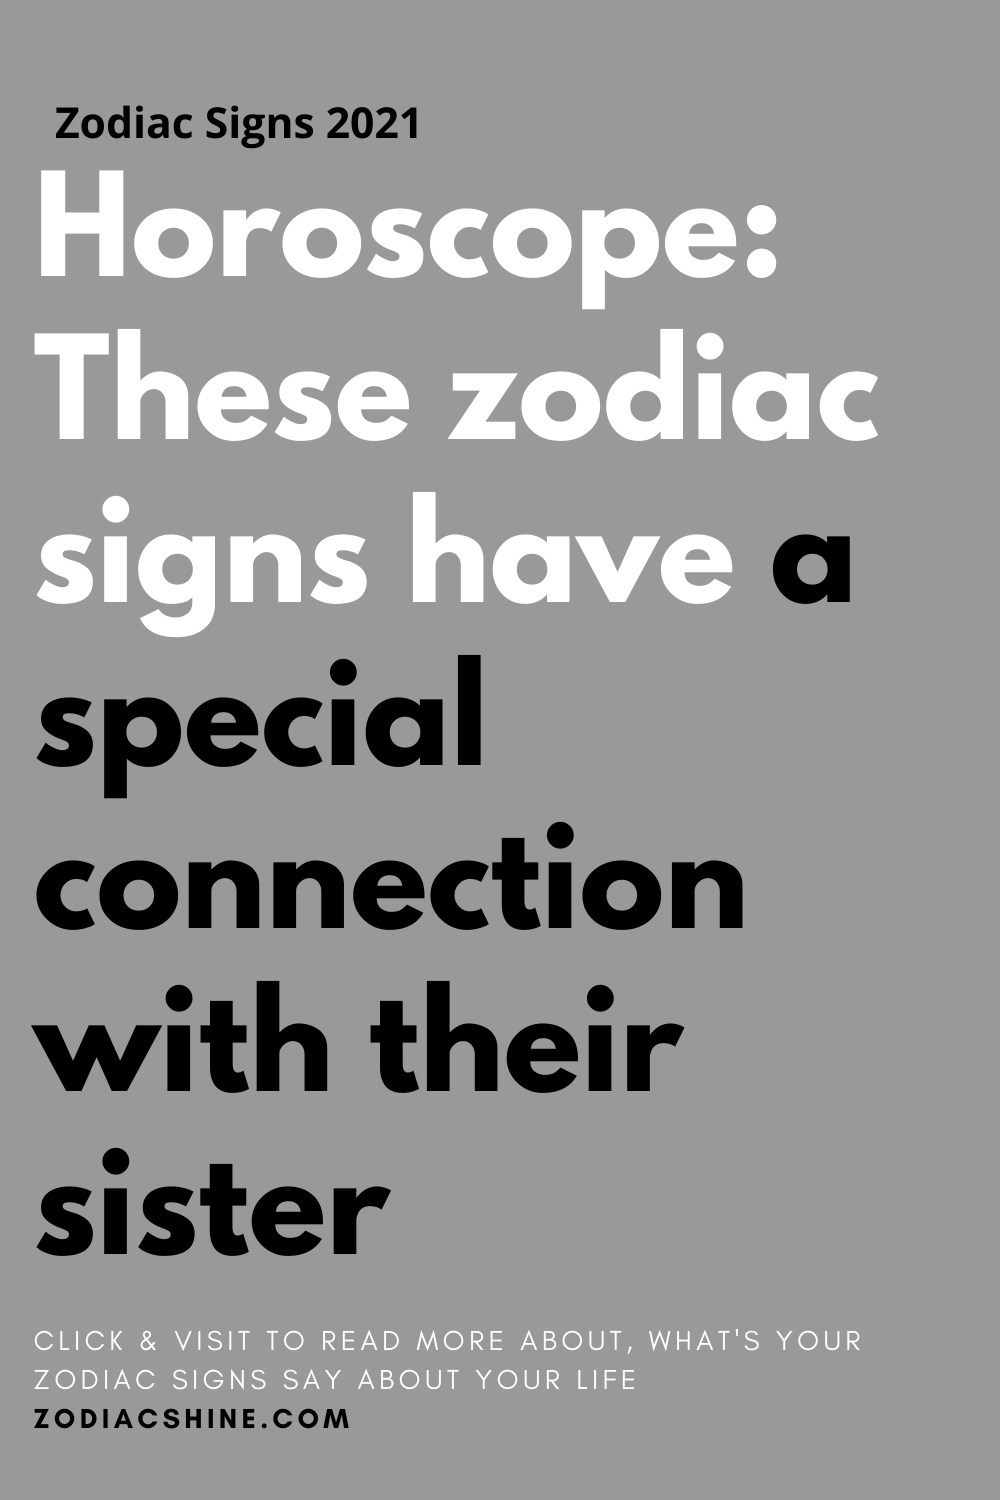 Horoscope: These zodiac signs have a special connection with their sister